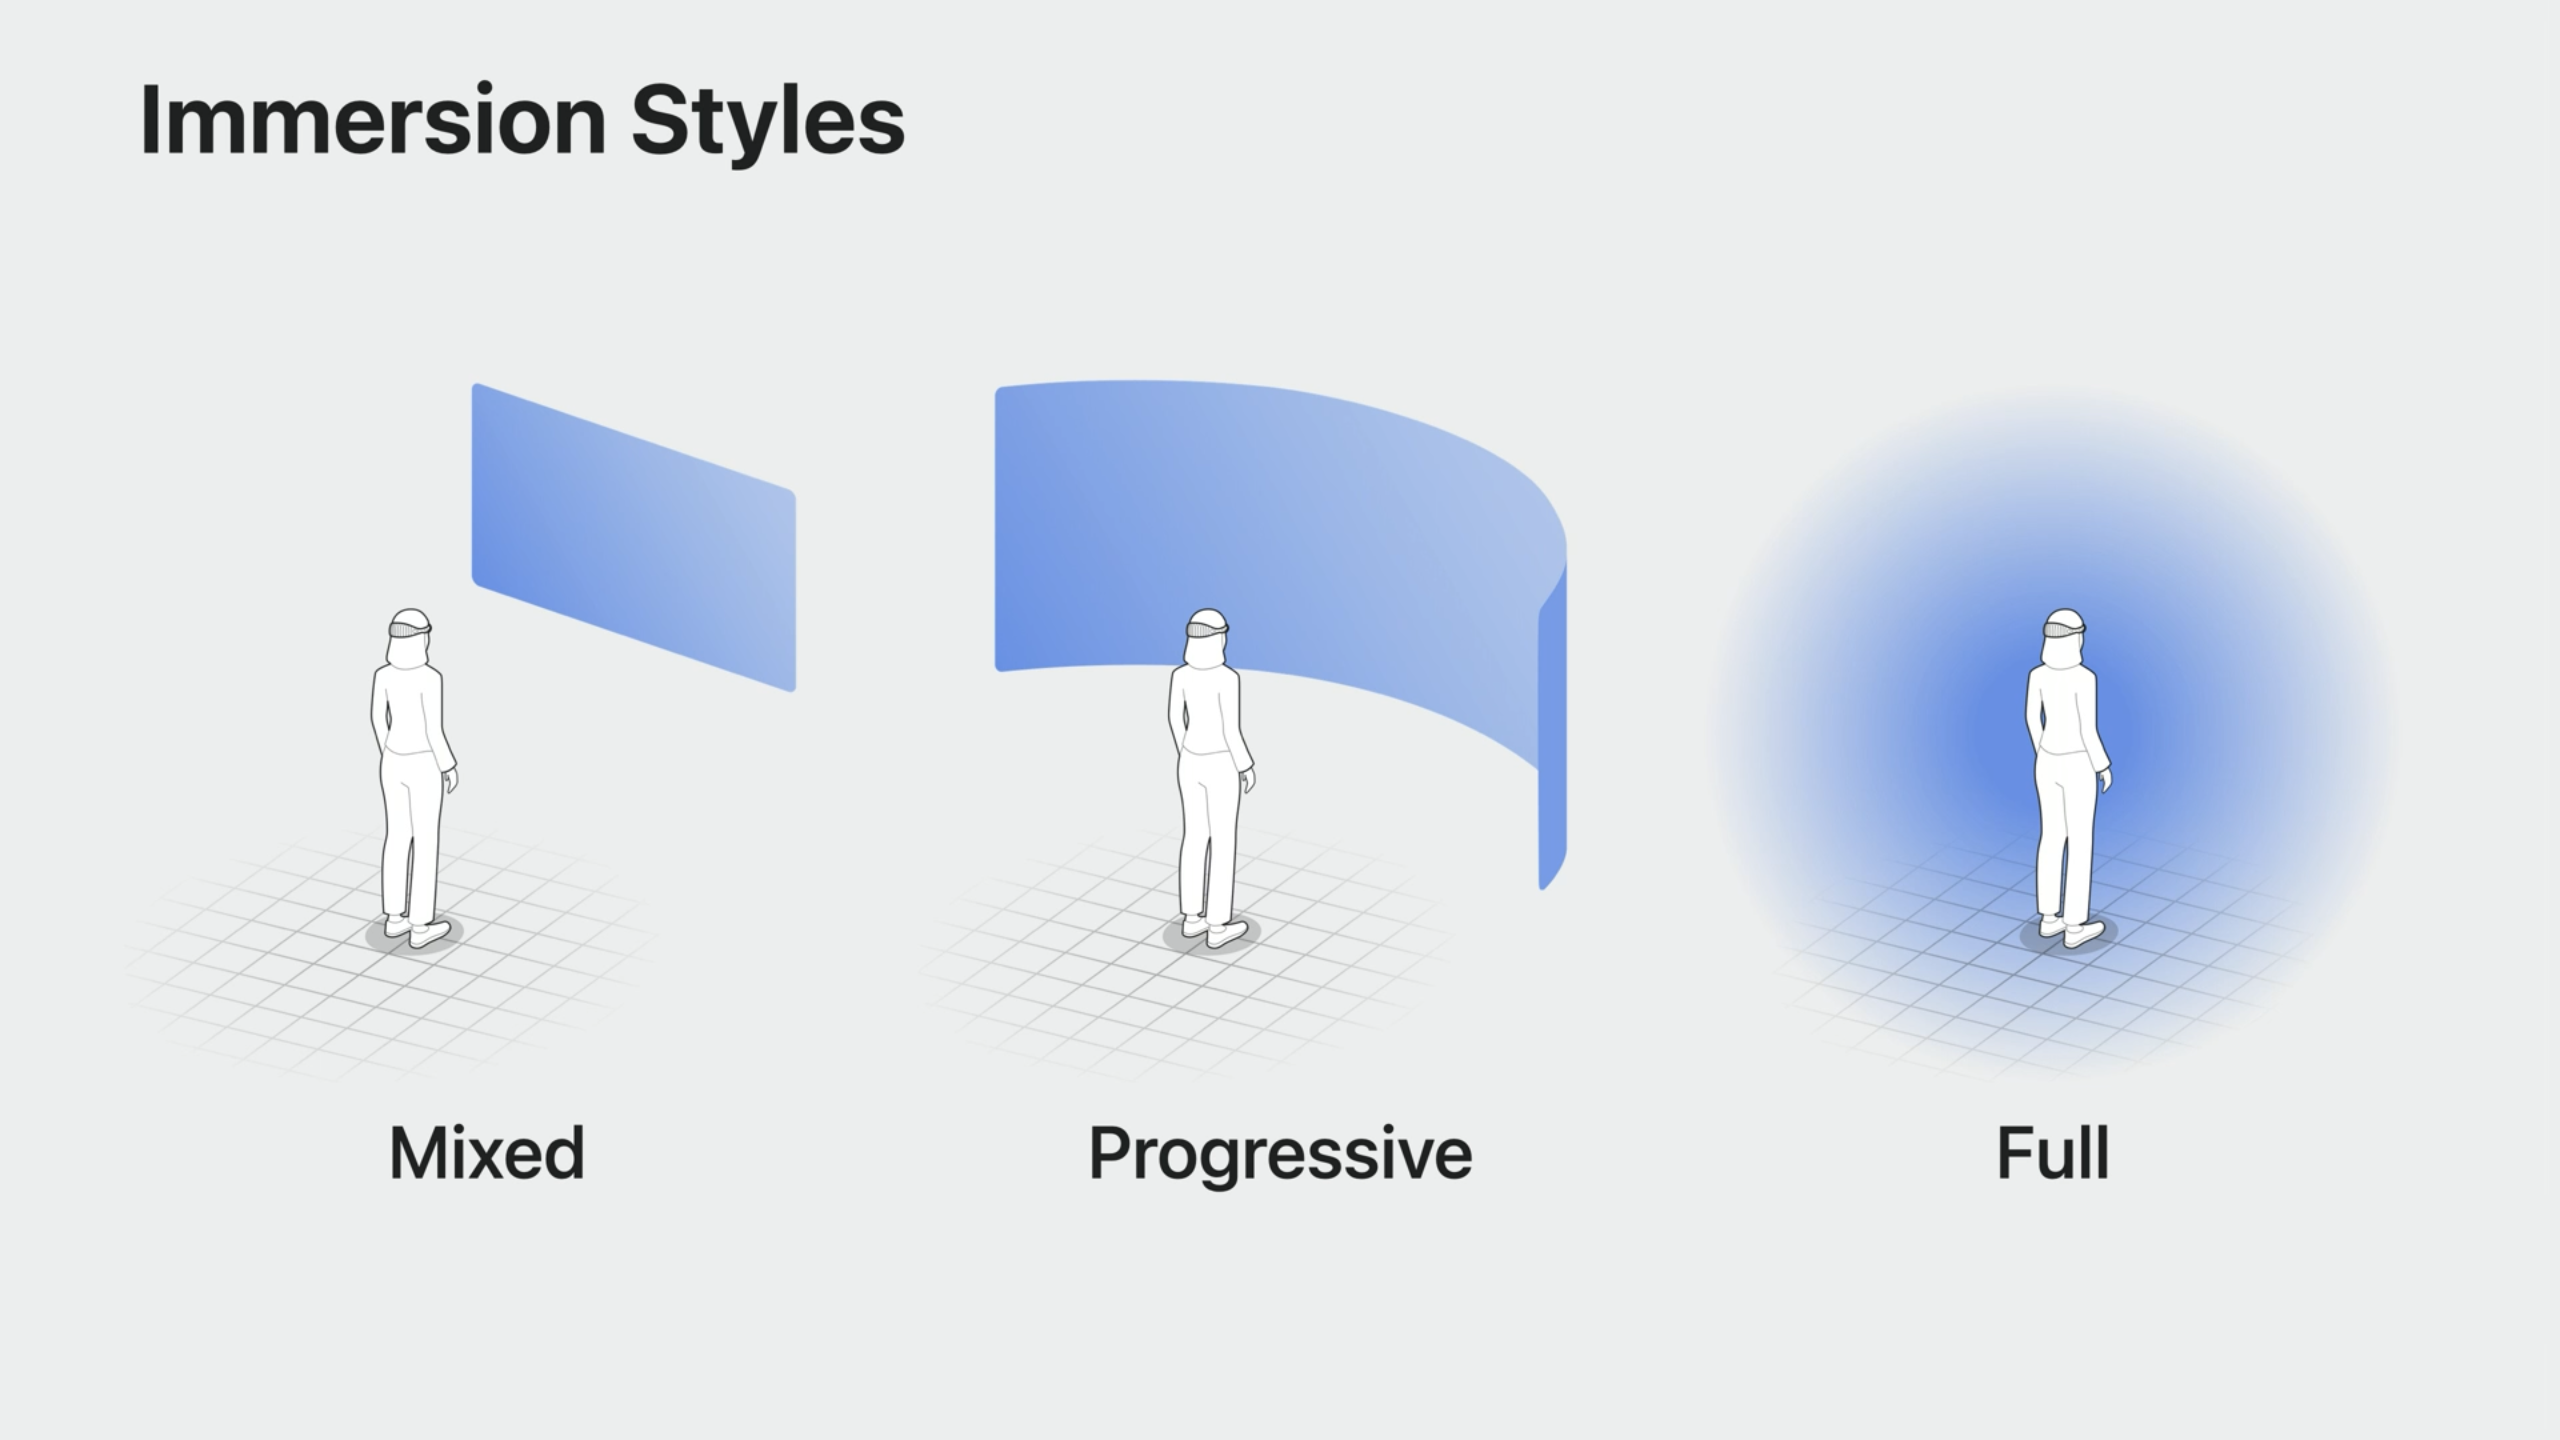 Styles of Immersion on visionOS: Mixed, Progressive, or Full